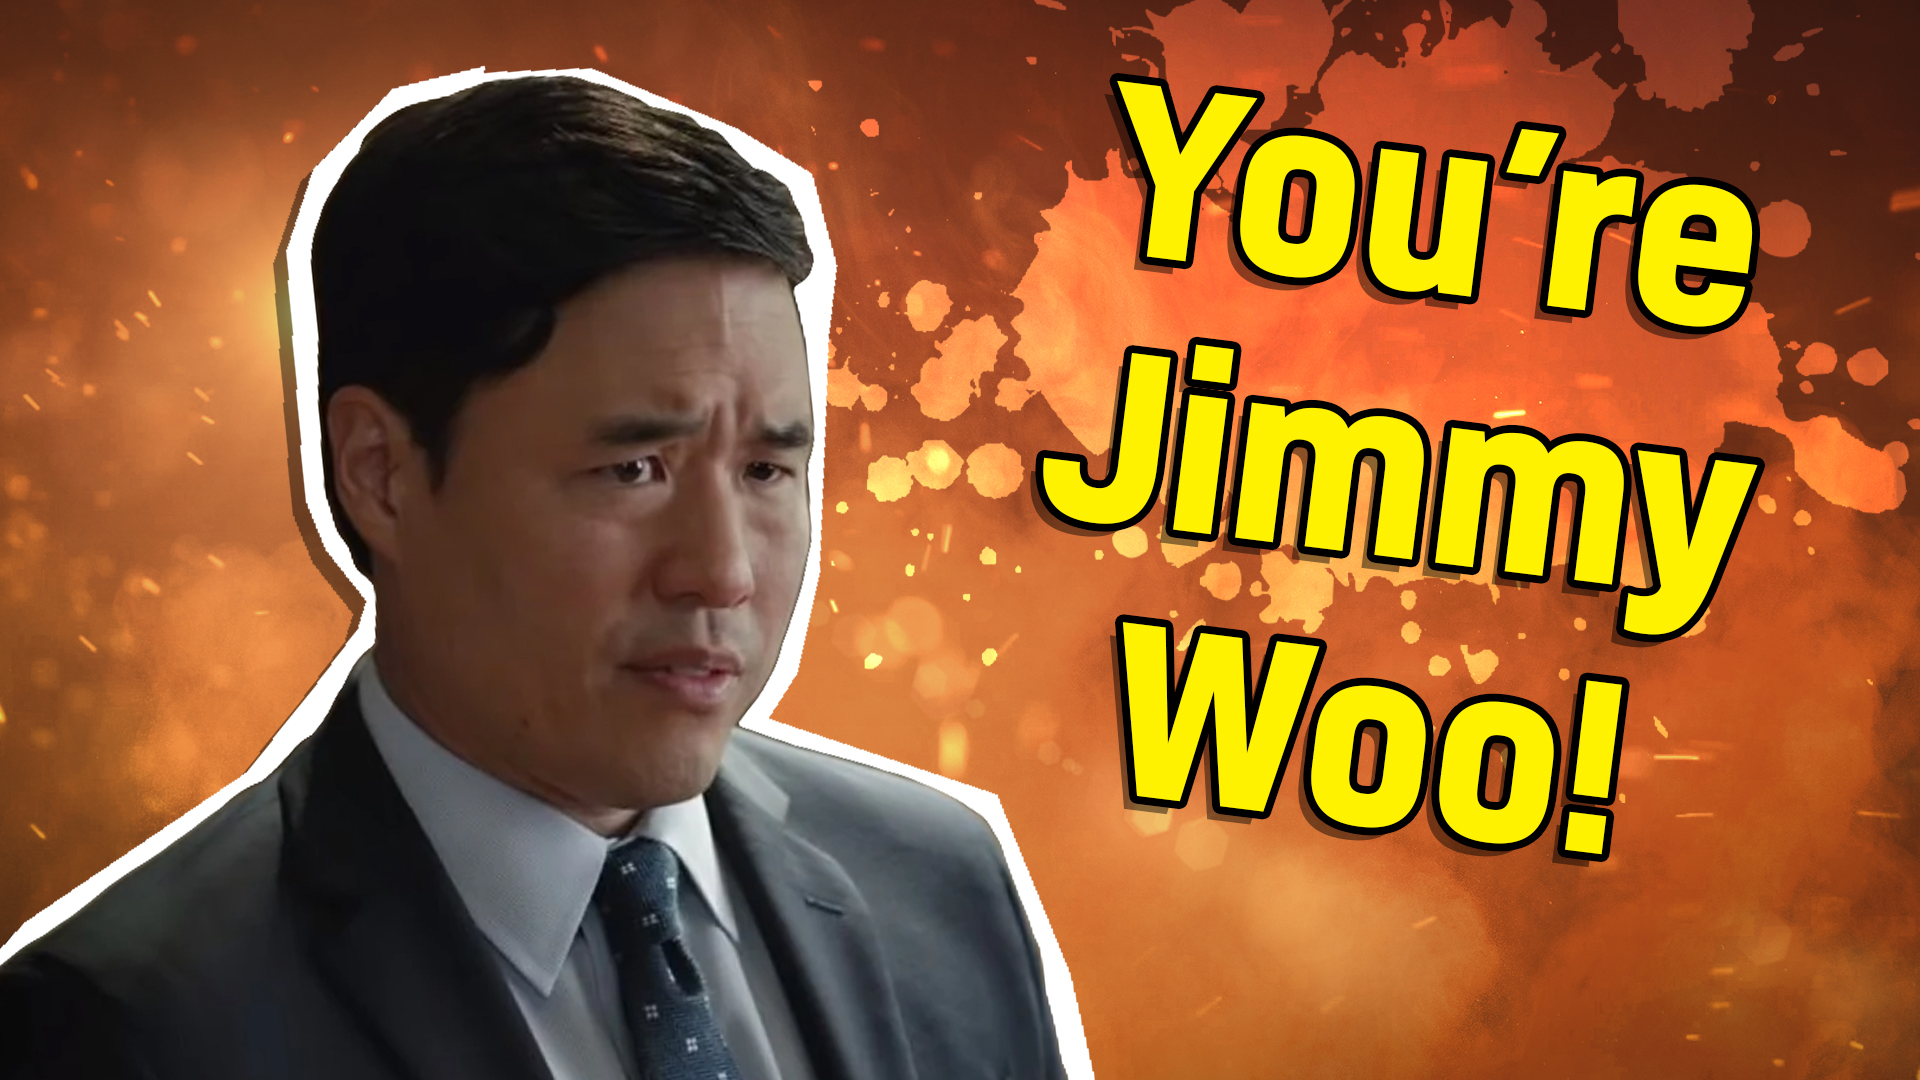 Result: You’re Jimmy Woo!